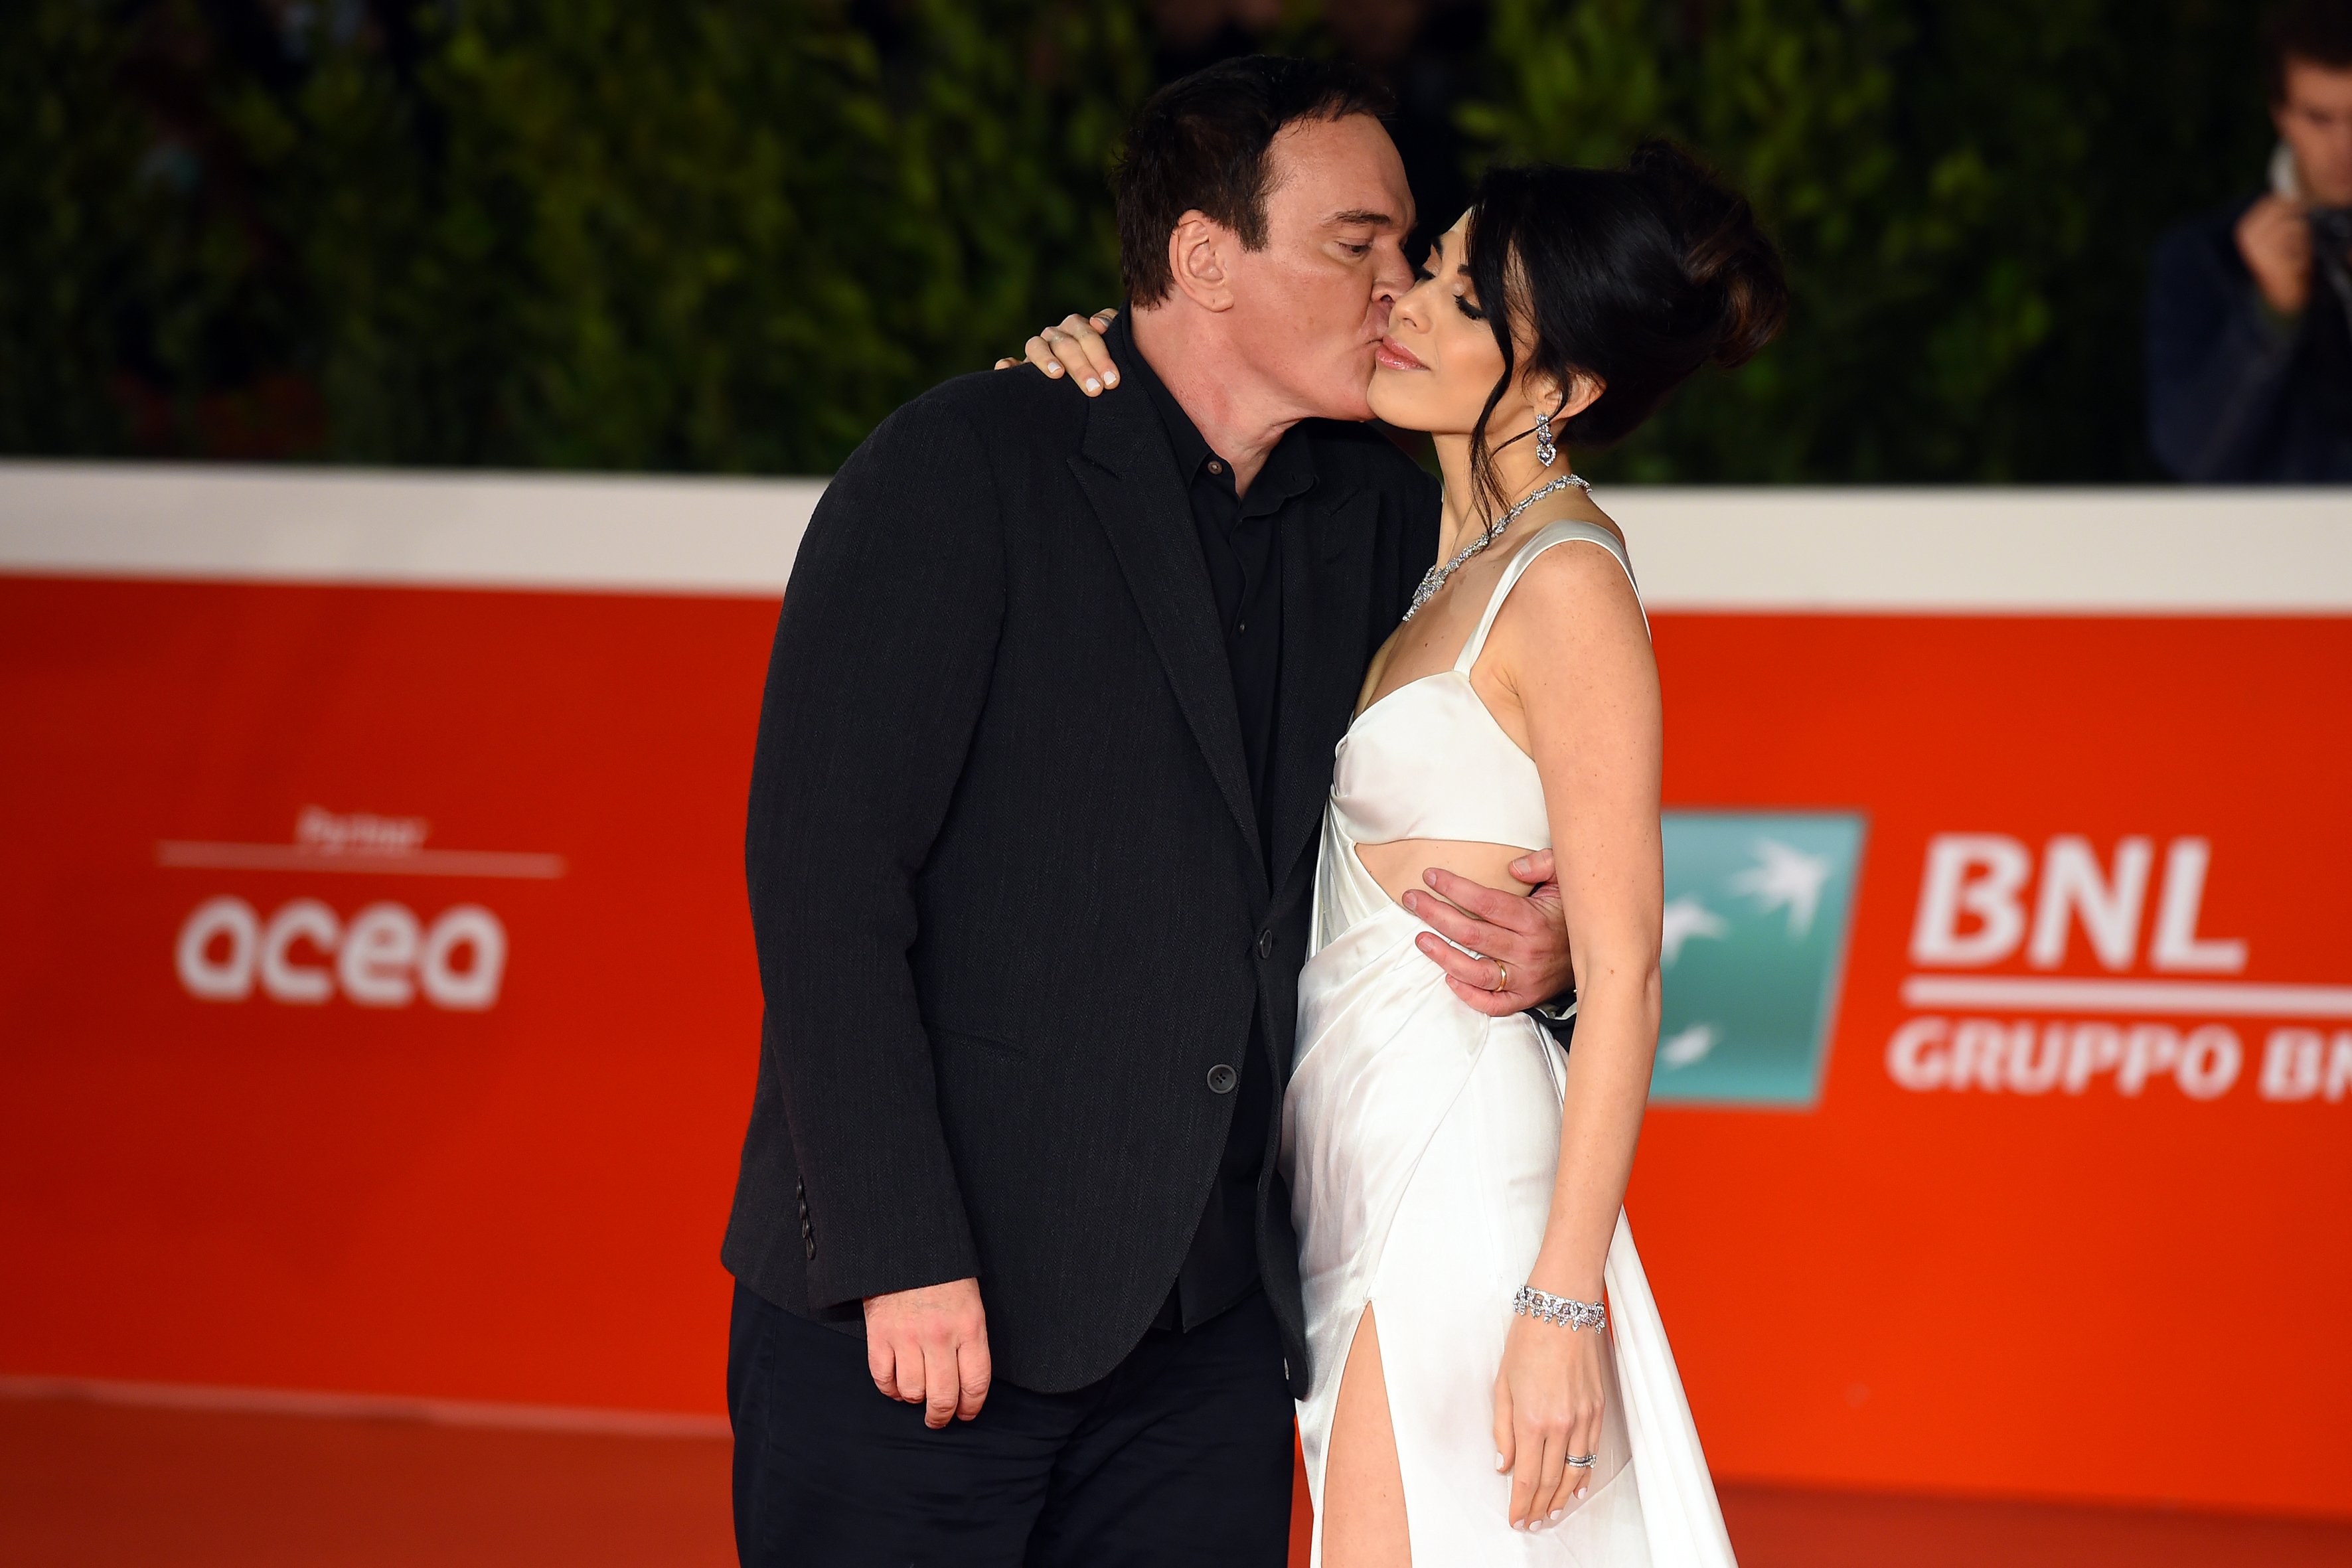 Quentin Tarantino and Daniella Pick at Rome Film Fest 2021 on October 19, 2021 in Rome, Italy.┃Source: Getty Images